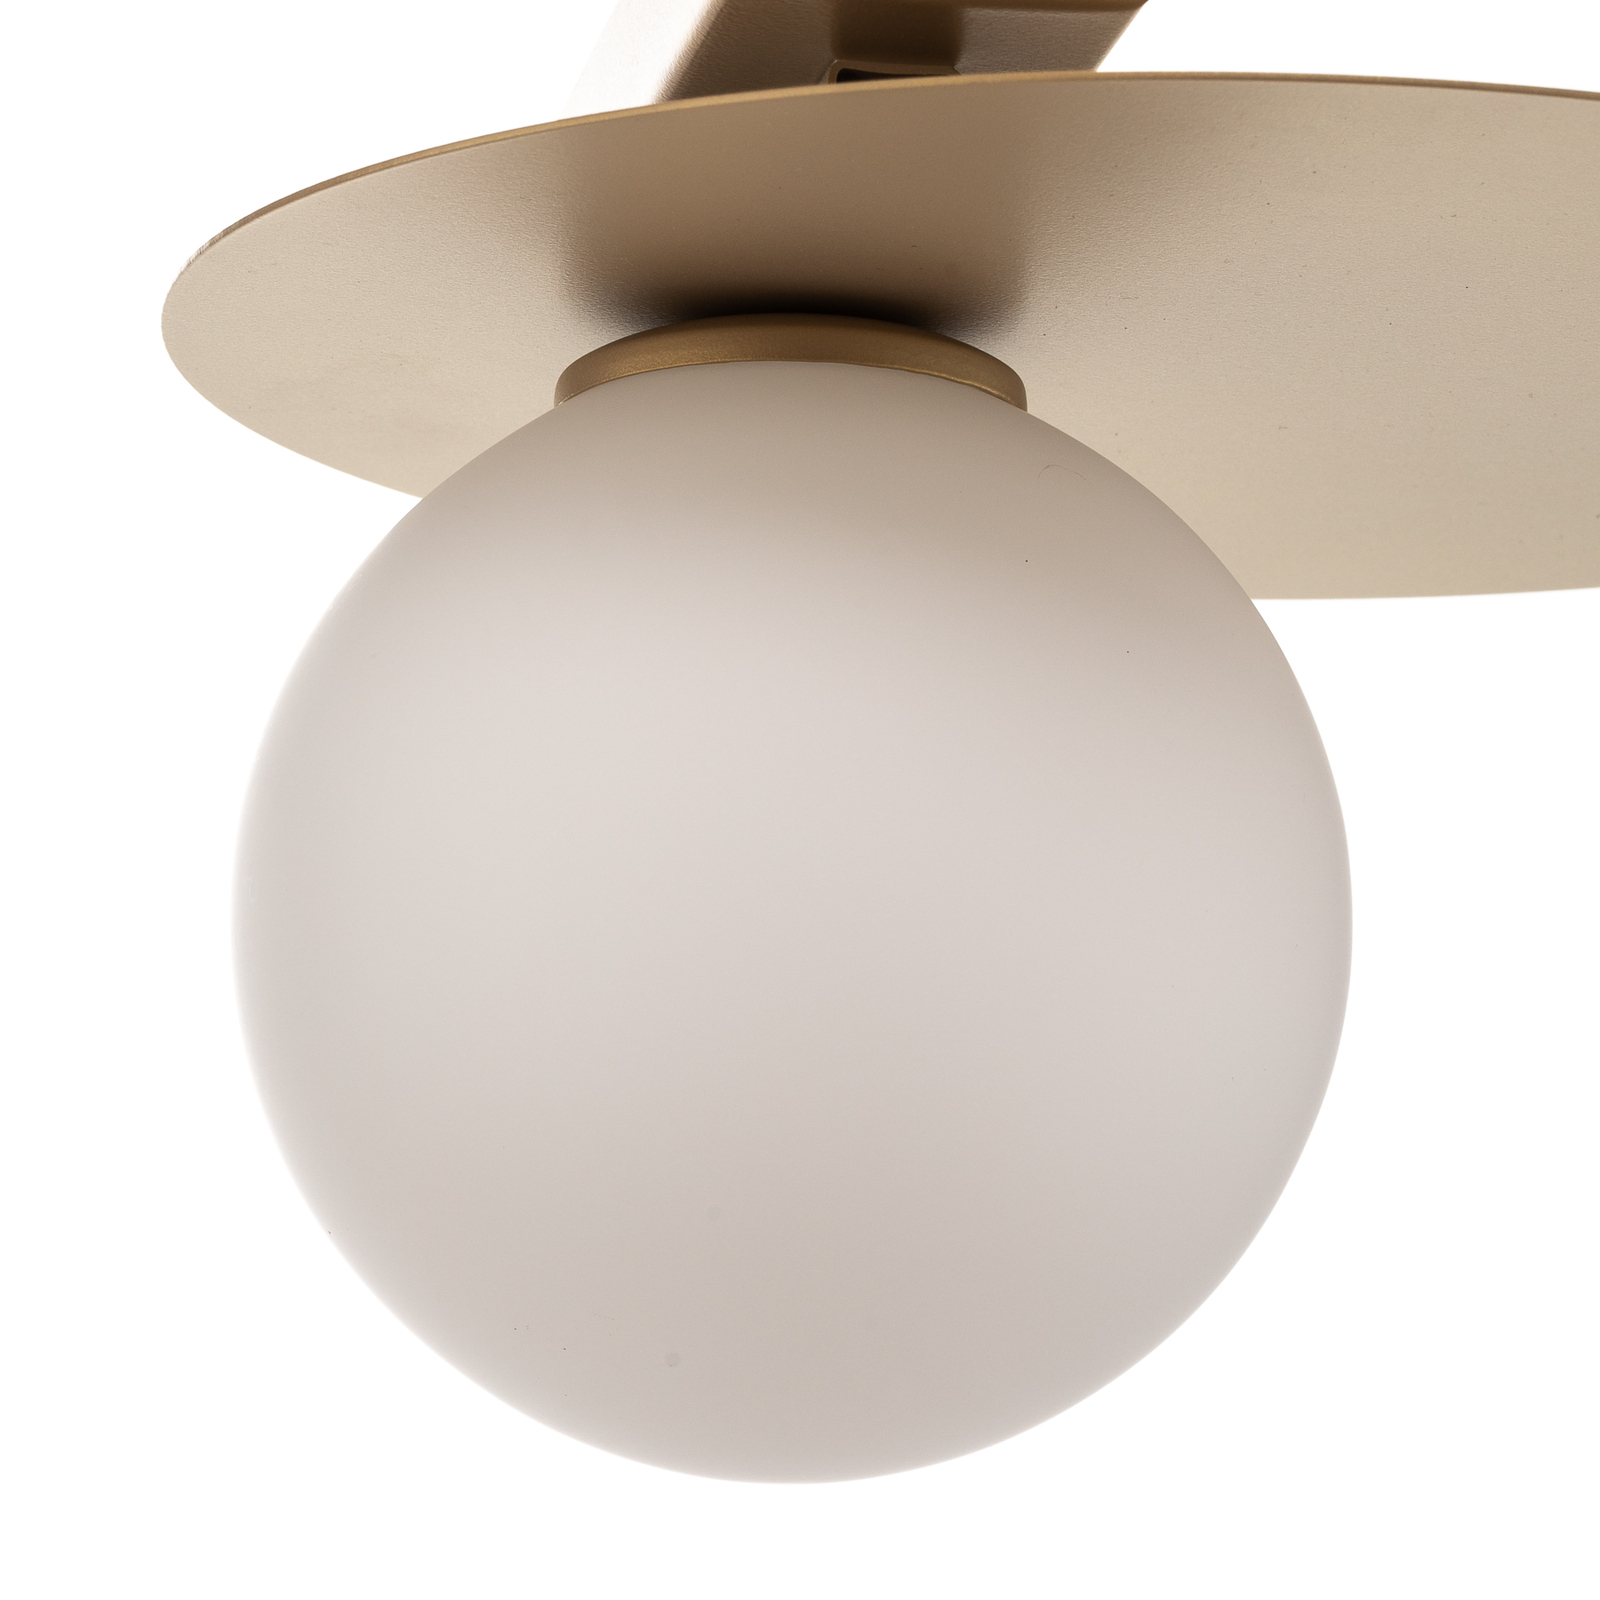 Firn ceiling light, round, one-bulb, gold